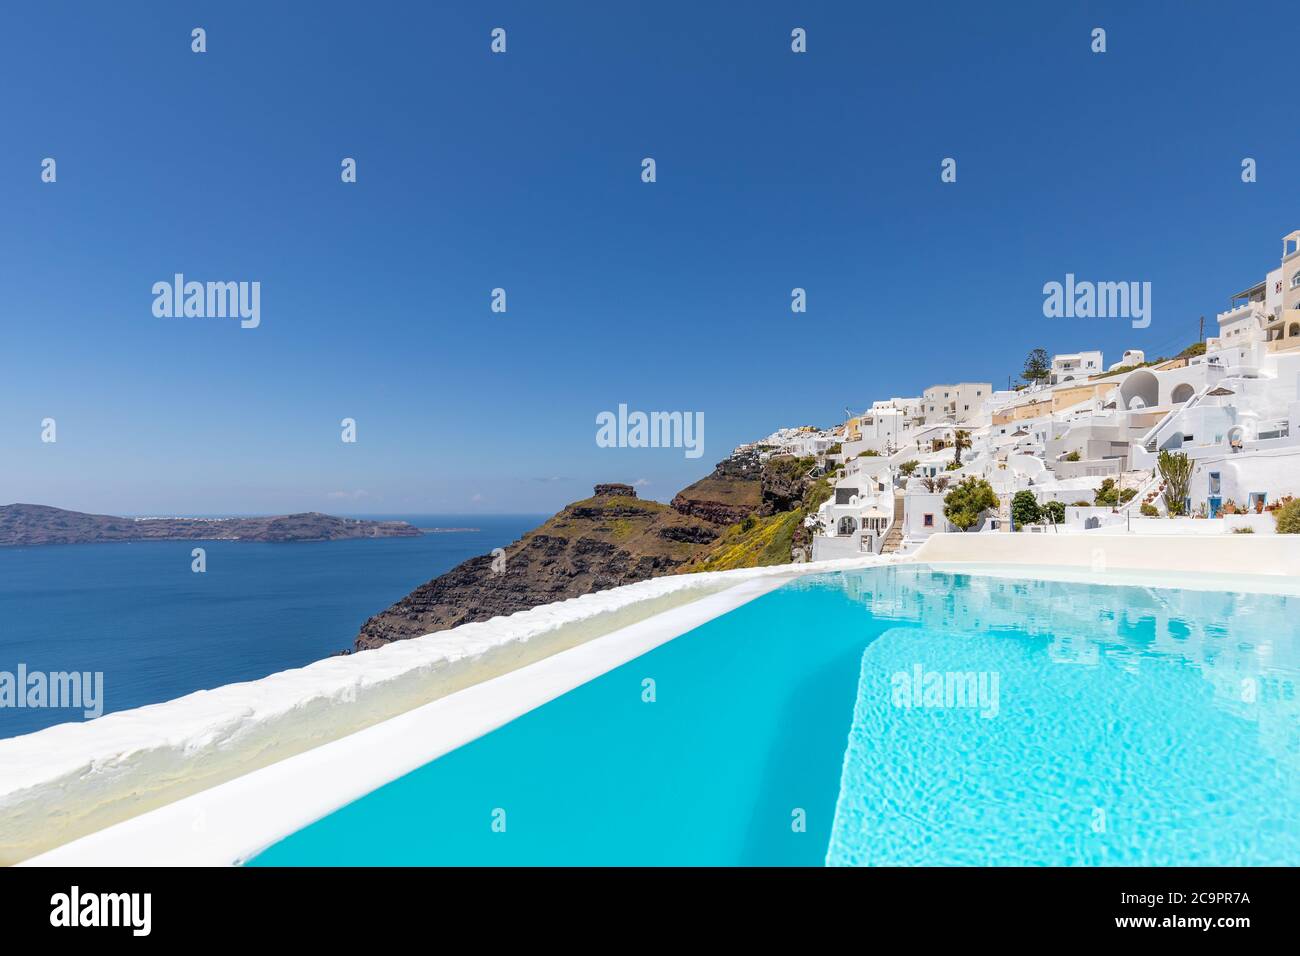 Swimming poolside, infinity pool relaxation view out over the sea caldera of Santorini Greece. Luxury travel, summer holiday vacation, peaceful resort Stock Photo